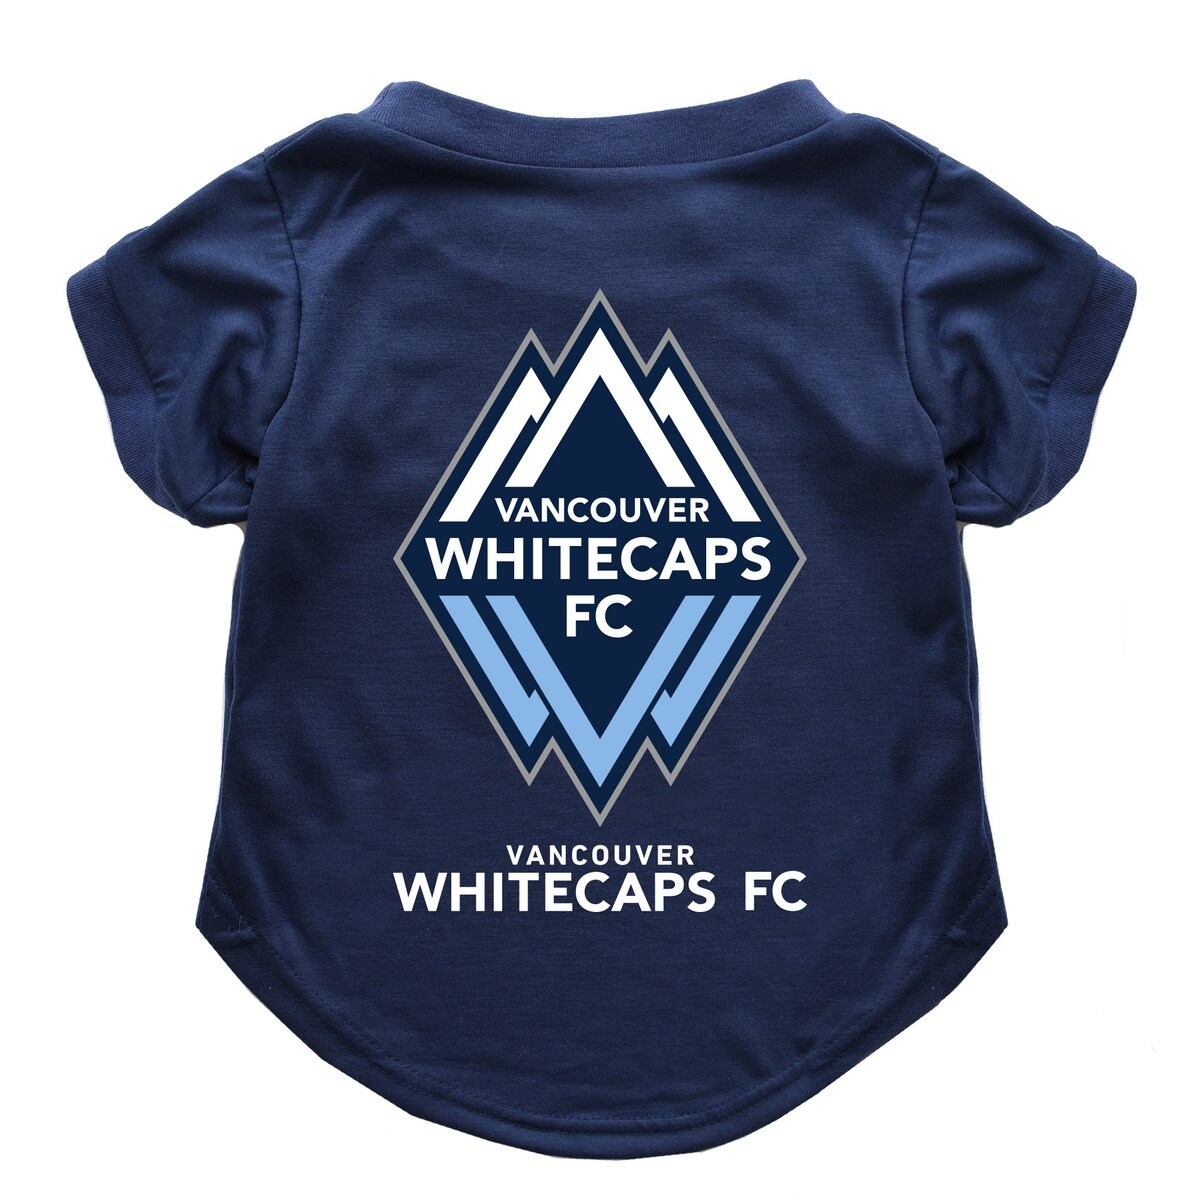 Help your best friend showcase their FURocity on Vancouver Whitecaps FC game days with this Little Earth Pet T-shirt. It features striking Vancouver Whitecaps FC graphics that let everyone know who they woof for on the pitch.Officially licensedSize L fits 28-42lbs.Size S fits 12-20lbs.Size 2XL fits 58-80lbs.Screen print graphicsShort sleeveMaterial: 100% PolyesterMachine wash, tumble dry lowImportedBrand: Little EarthSize M fits 18-30lbs.Size XL fits 40-60lbs.Crew neck